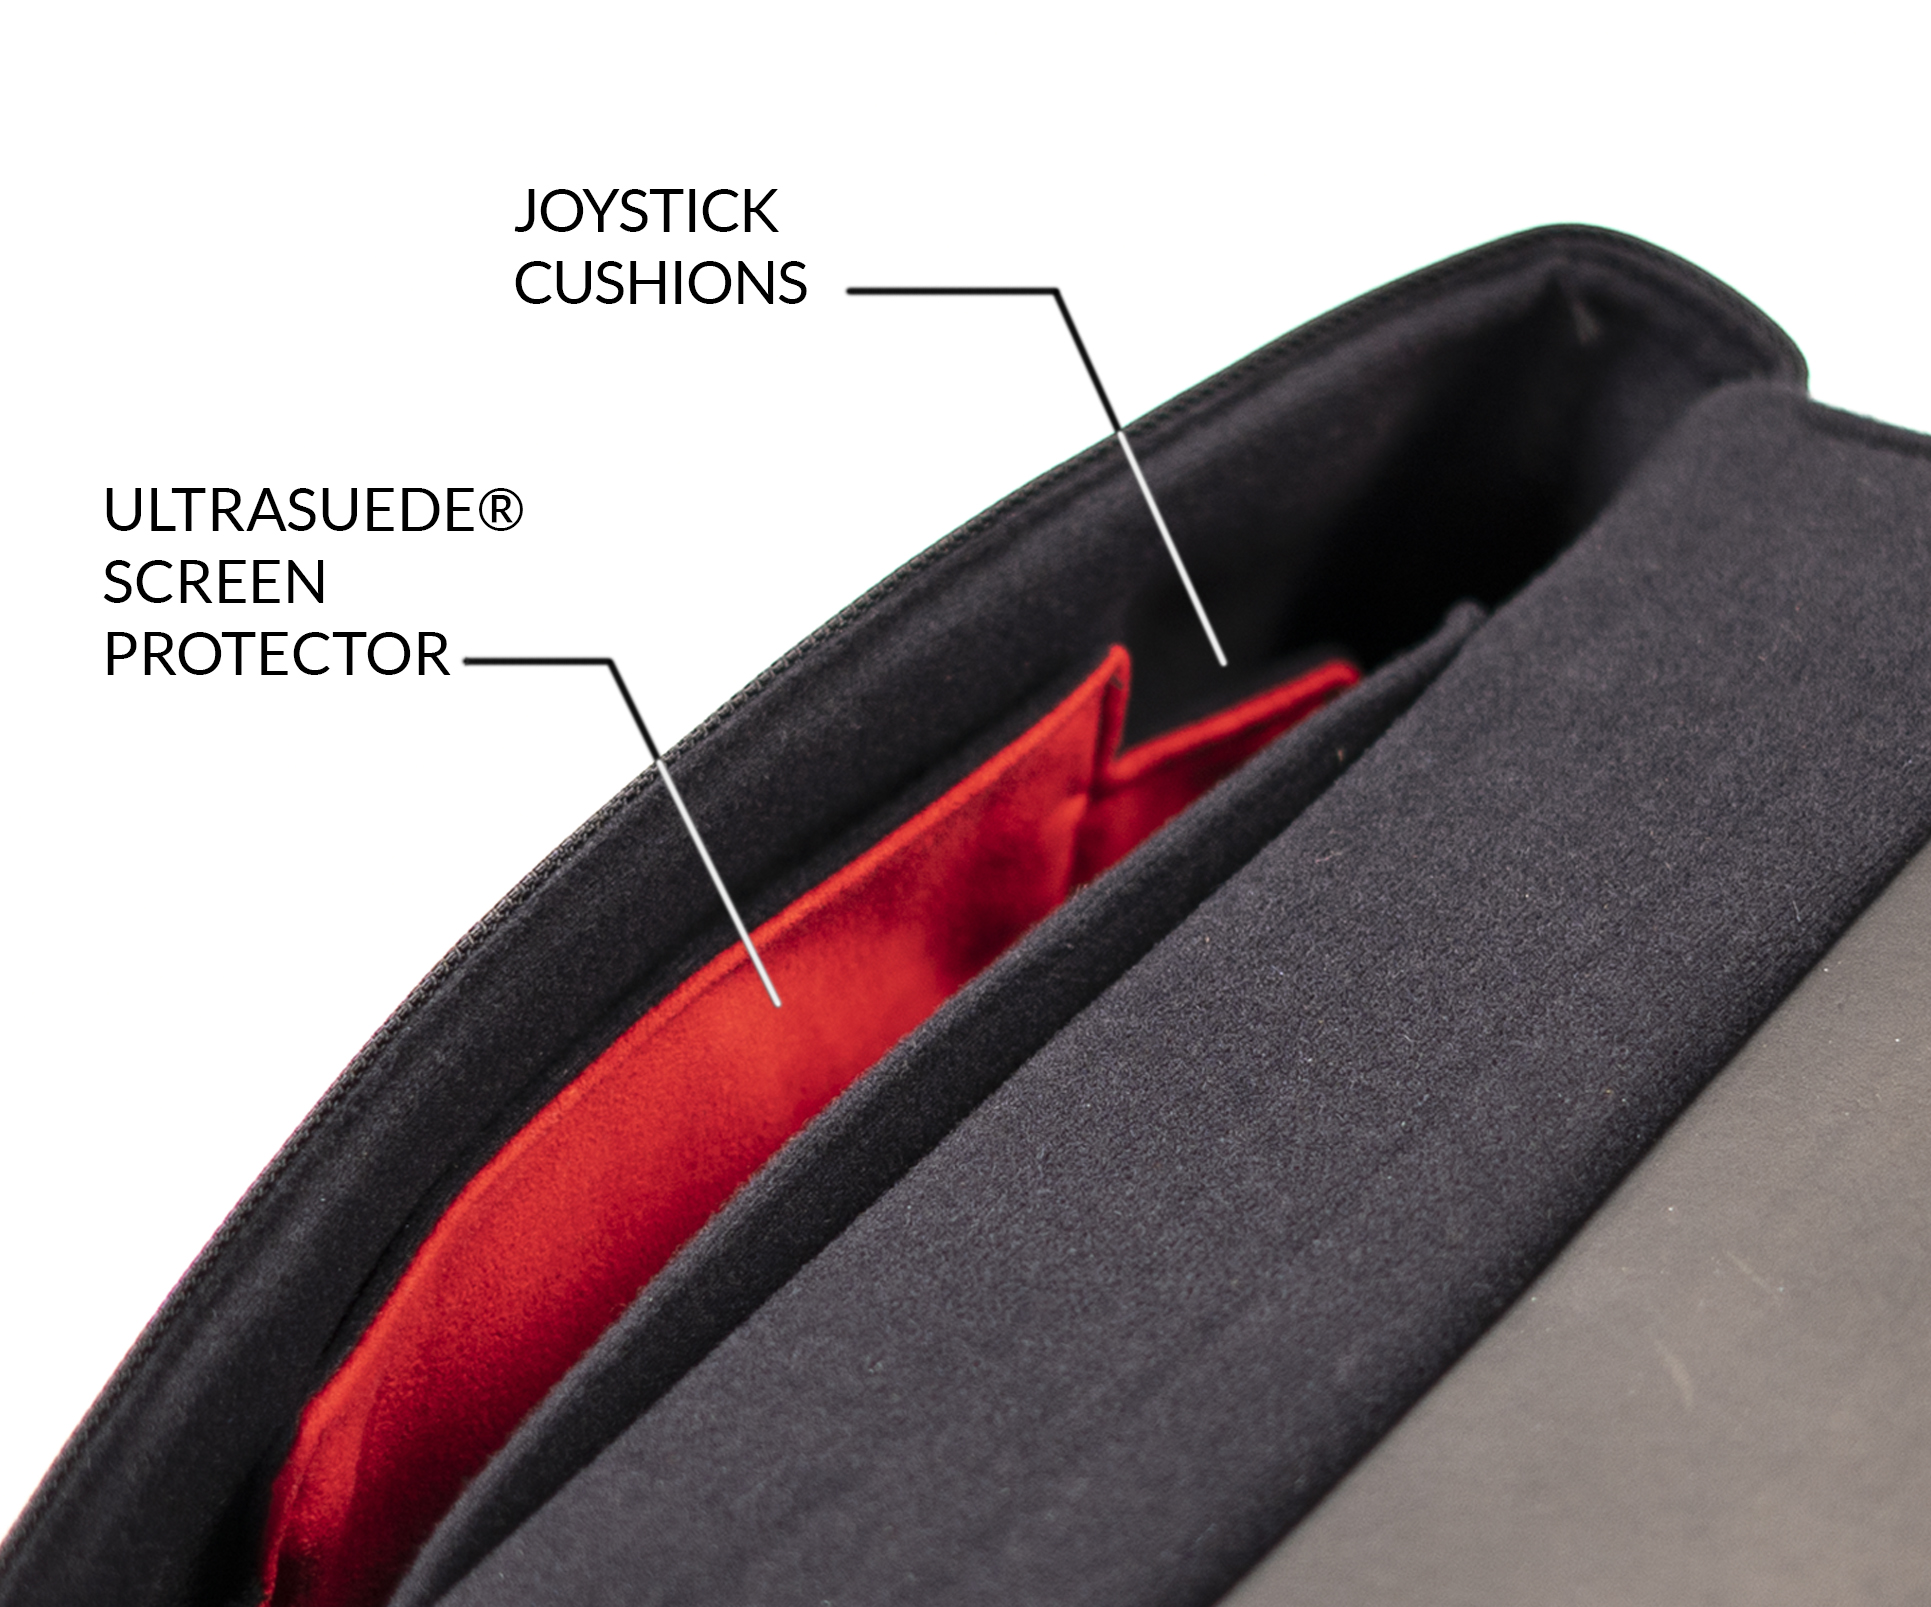 CitySlicker interior with Ultrasuede pocket and joystick cushions